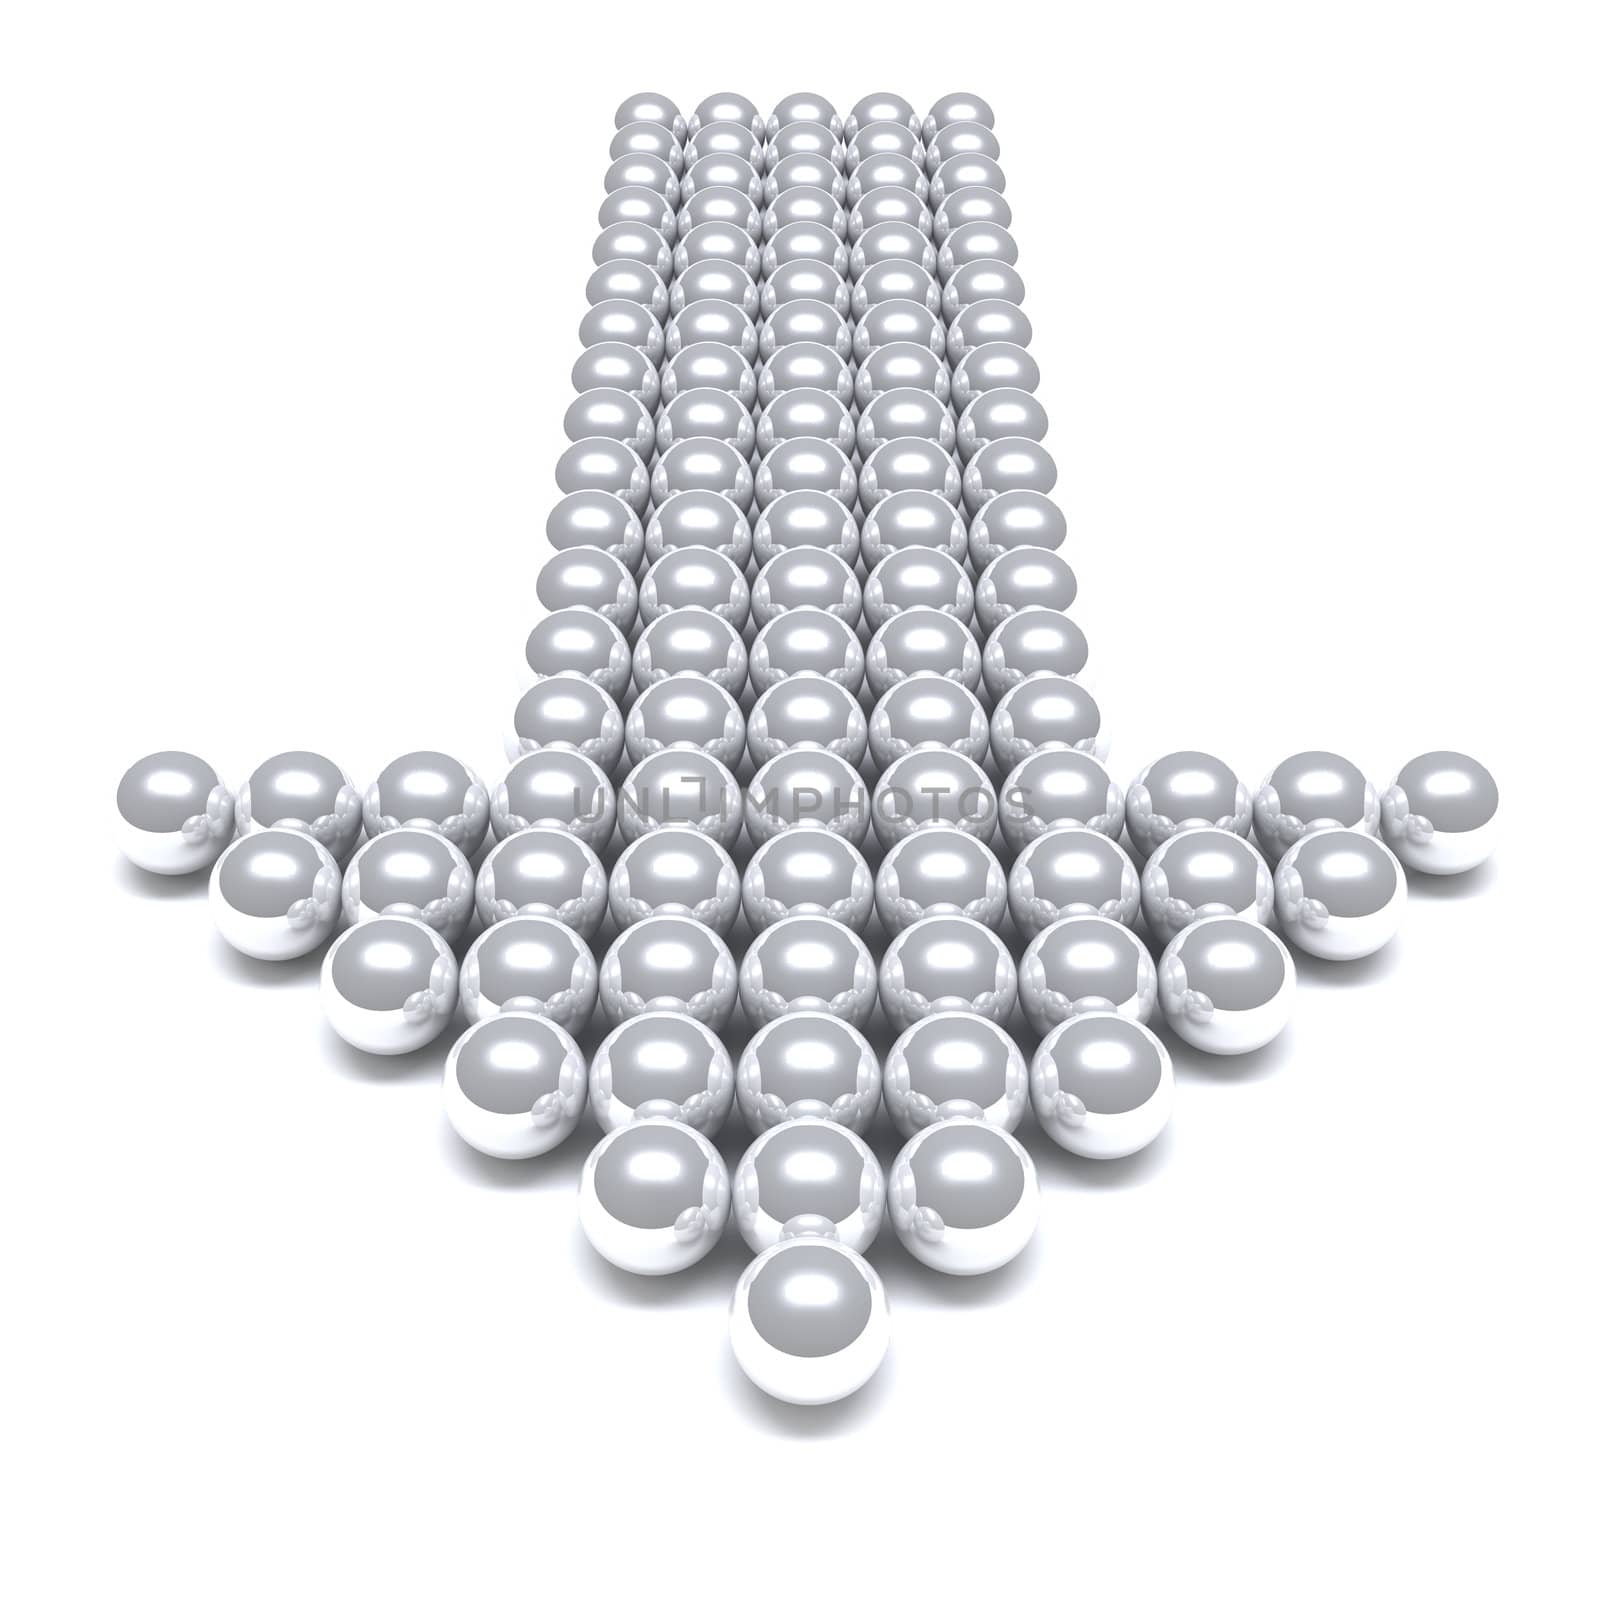 Grey arrow consisting of metal balls on a white background by Serp